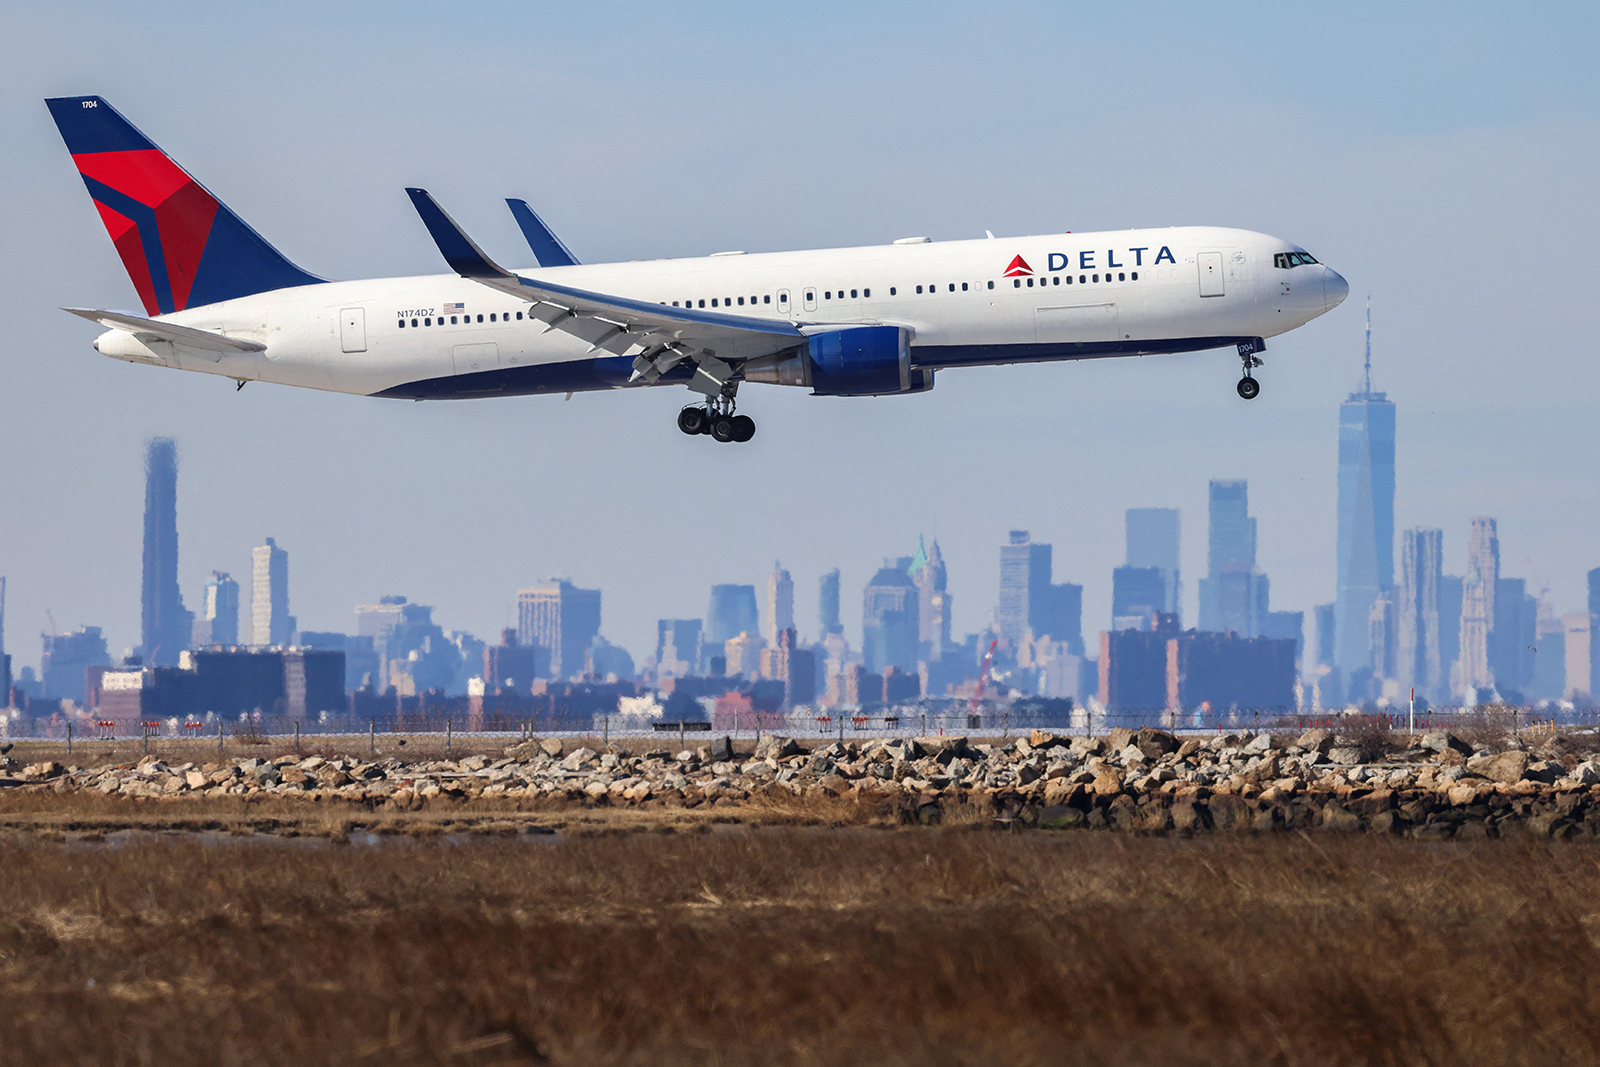 A Delta airlines aircraft arrives at JFK International Airport in New York on February 7.